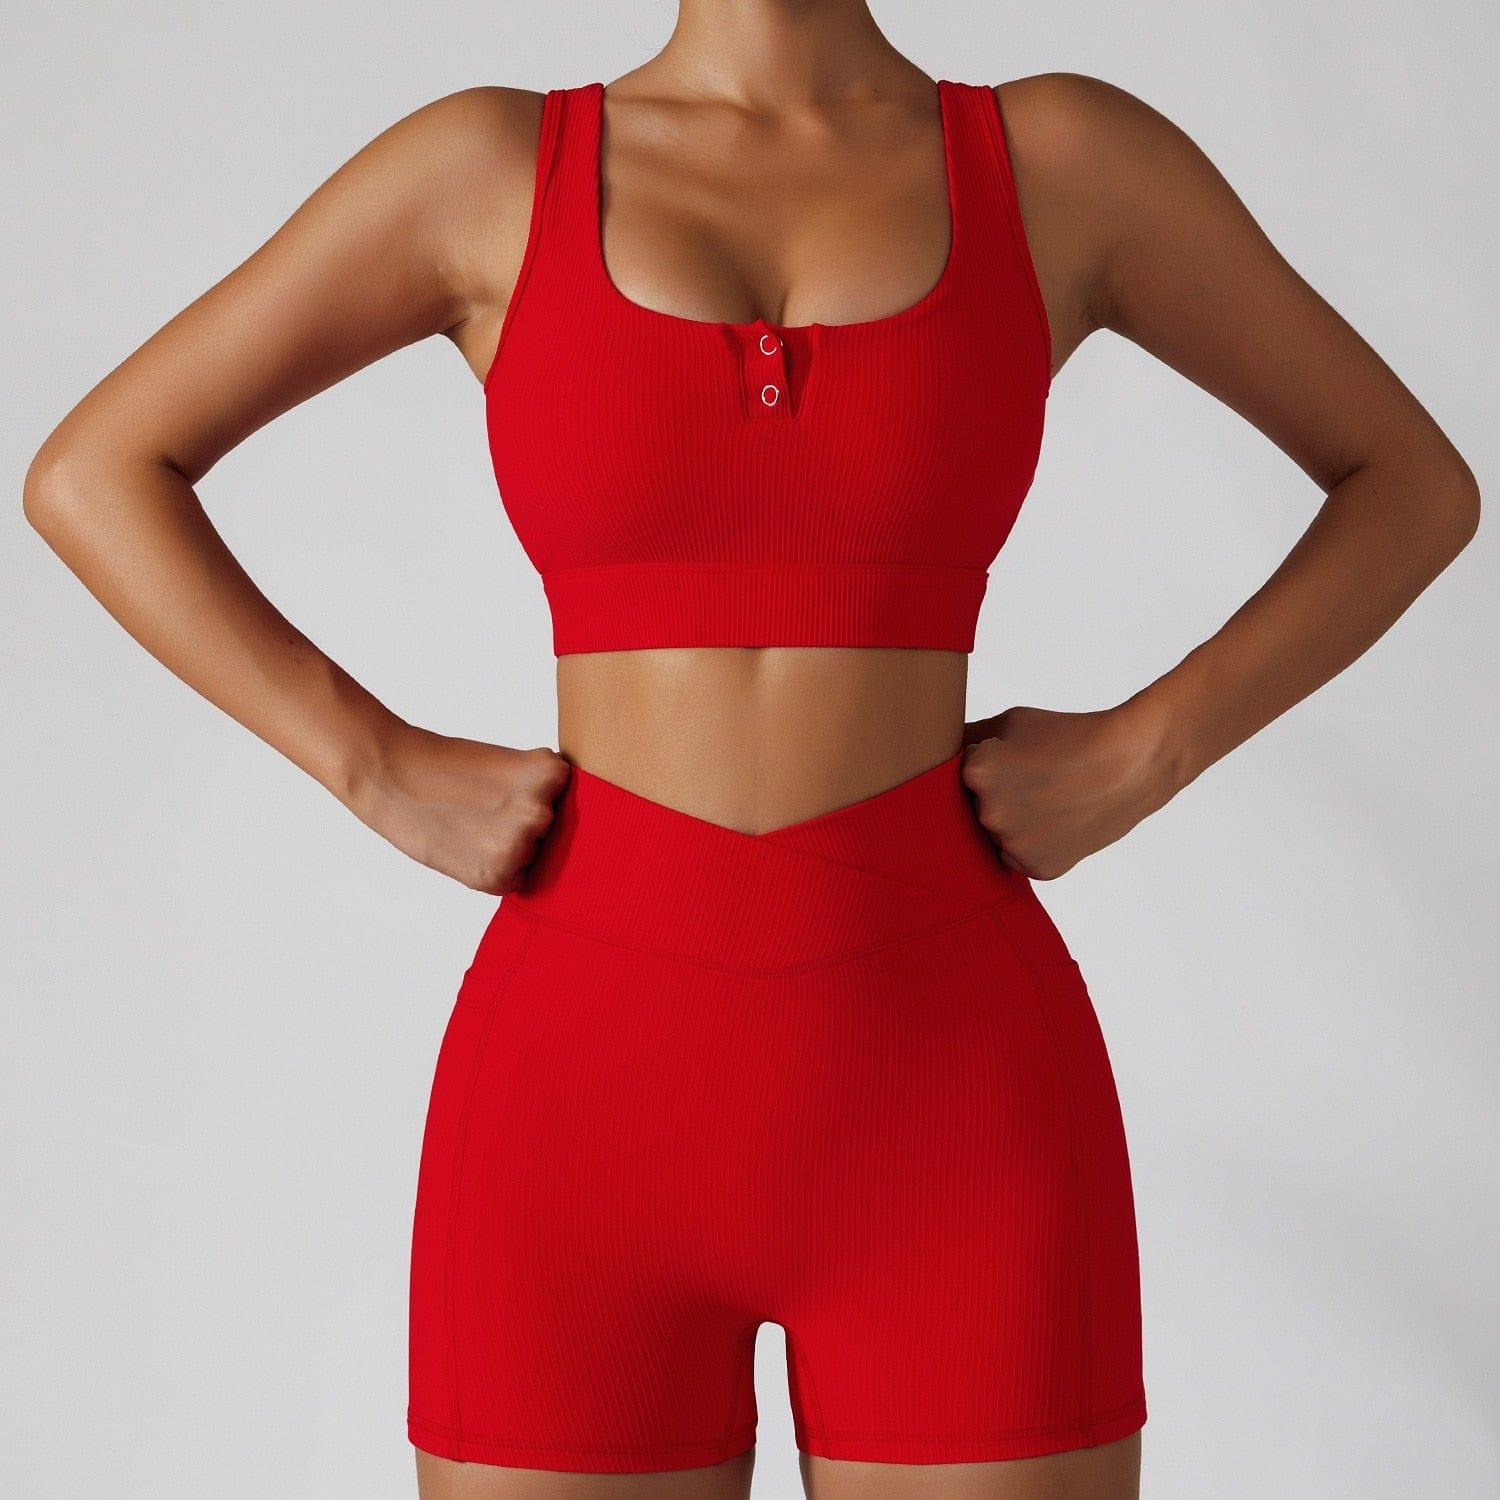 Shop 0 Red suit-1 / S / China 2 Pieces Seamless Women Tracksuit  Yoga Set Running Workout Sportswear Gym Clothes Fitness Bra High Waist Leggings Sports Suit Mademoiselle Home Decor